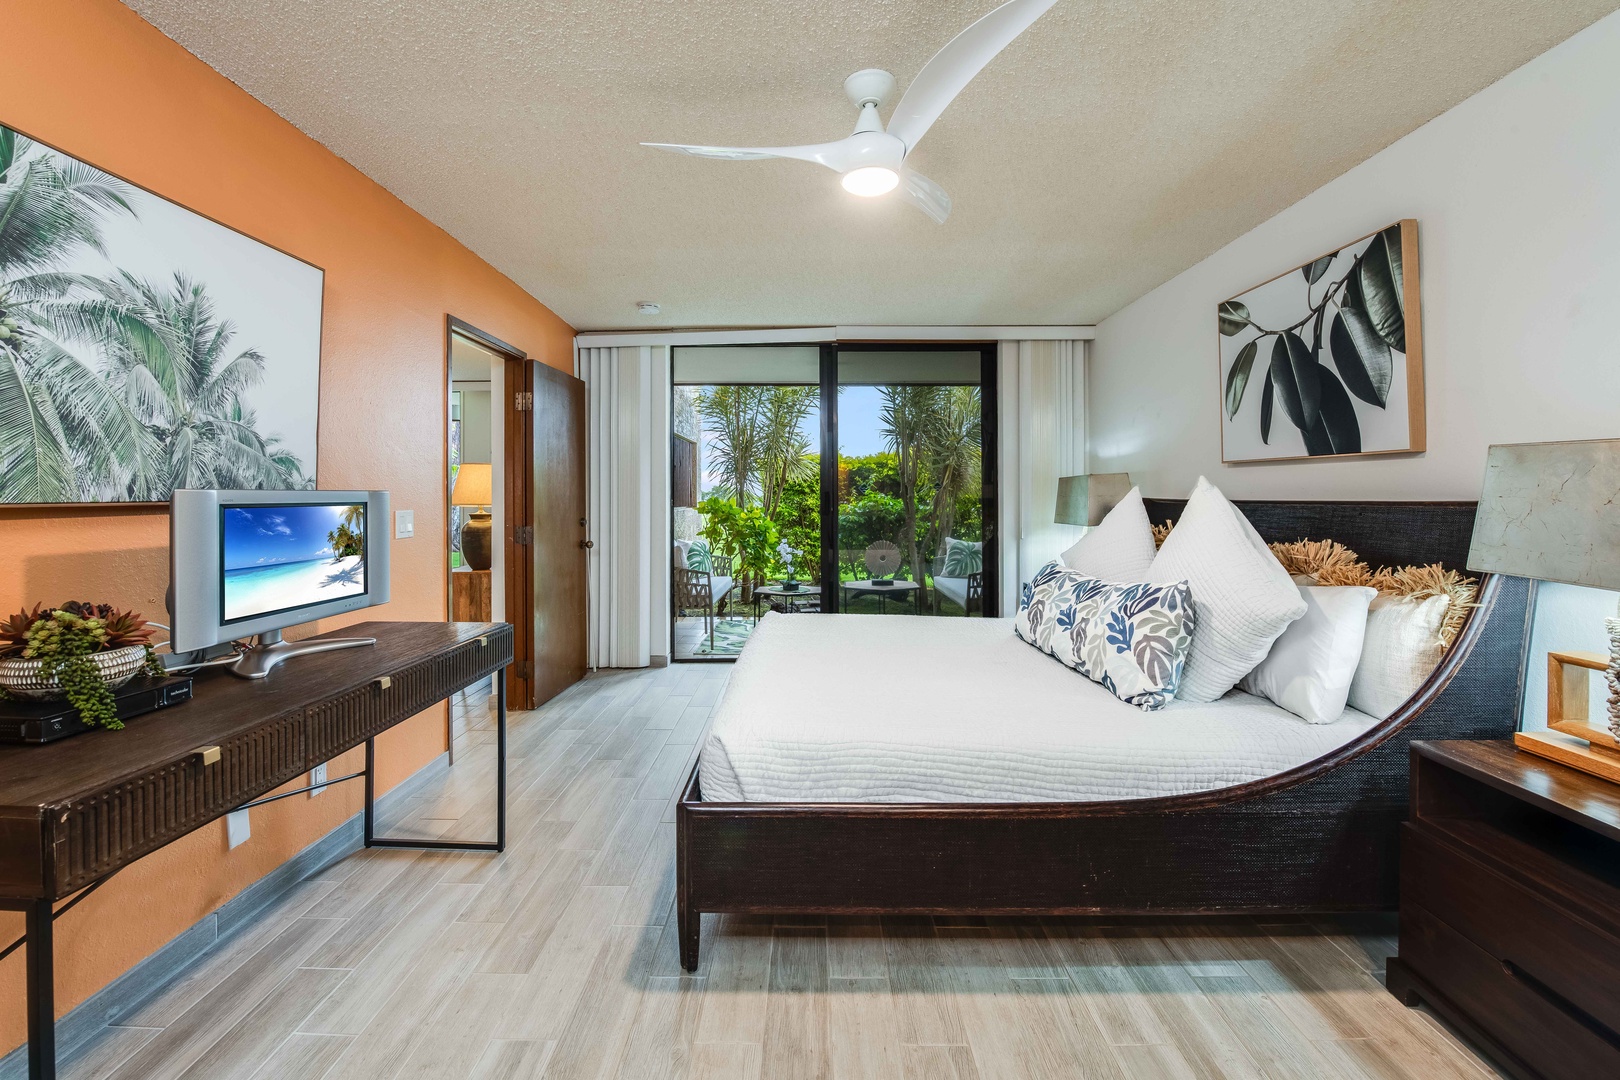 Waikoloa Vacation Rentals, Waikoloa Villas A107 - Gorgeous Primary Bedroom w/ Cal King Bed & Private Lanai